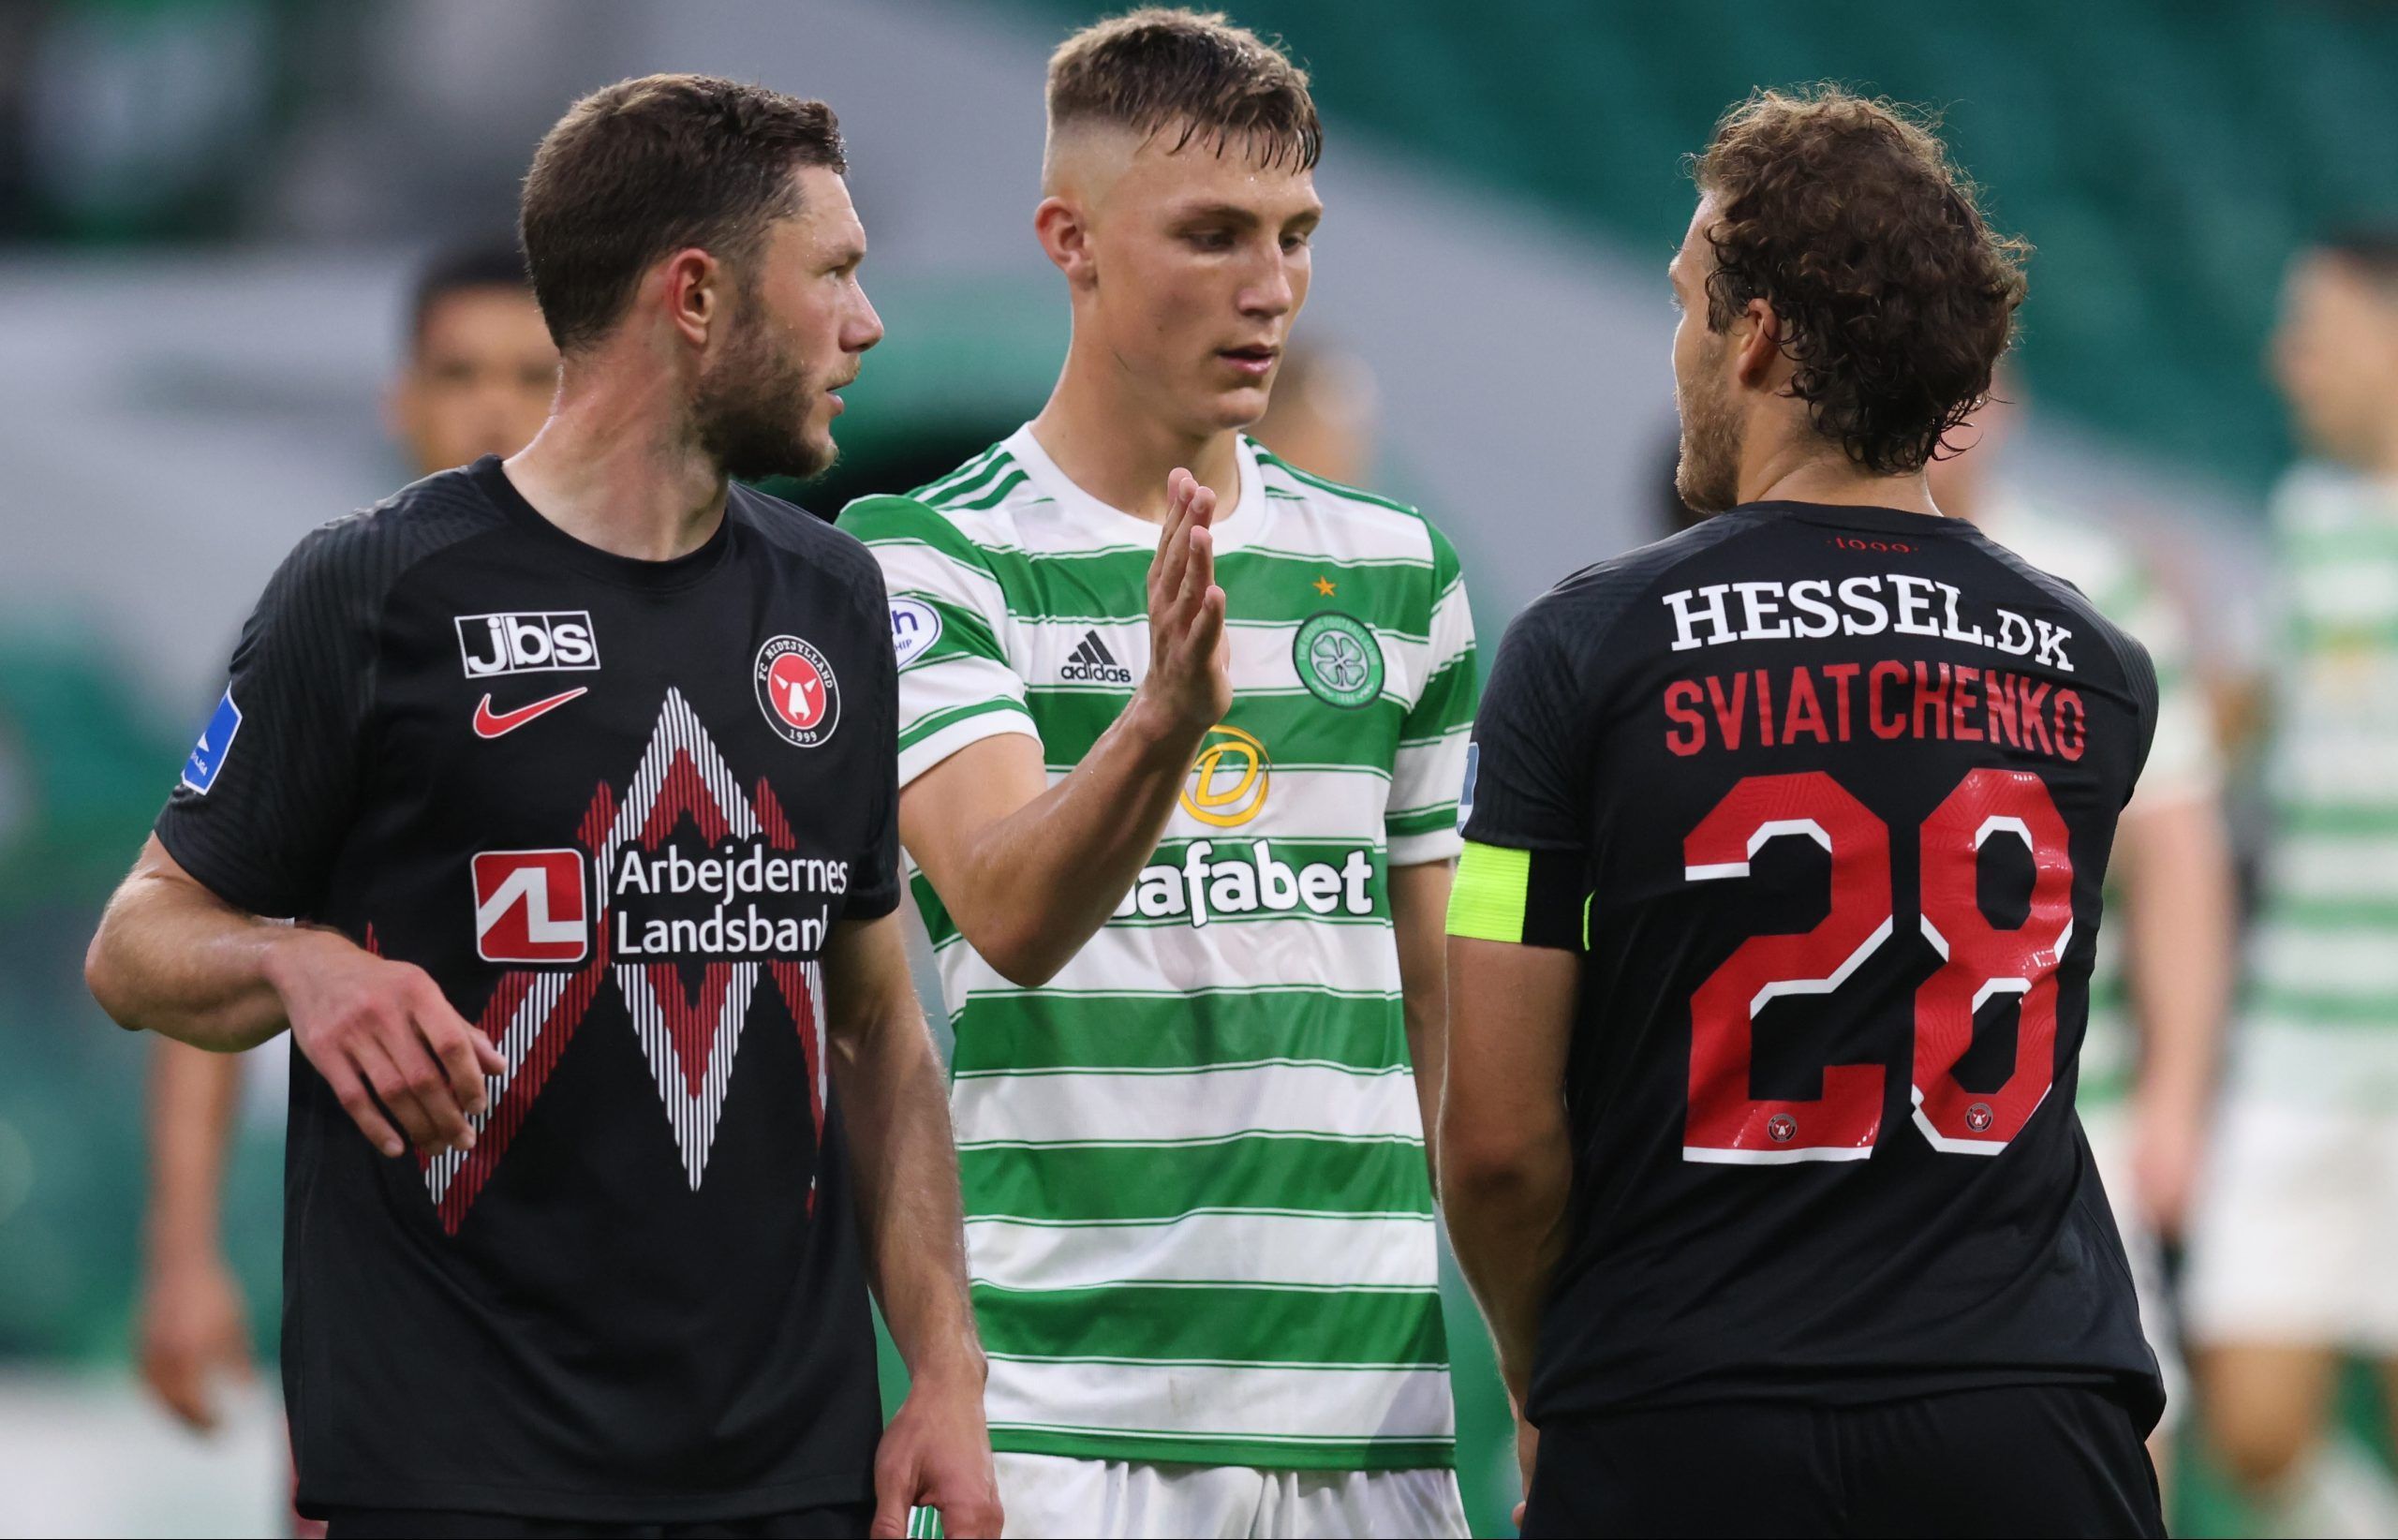 Soccer Football - Champions League - Second Qualifying Round - Celtic v FC Midtjylland - Celtic Park, Glasgow, Scotland, Britain - July 20, 2021  Celtic's Dane Murray with FC Midtjylland's Erik Sviatchenko after the match REUTERS/Russell Cheyne